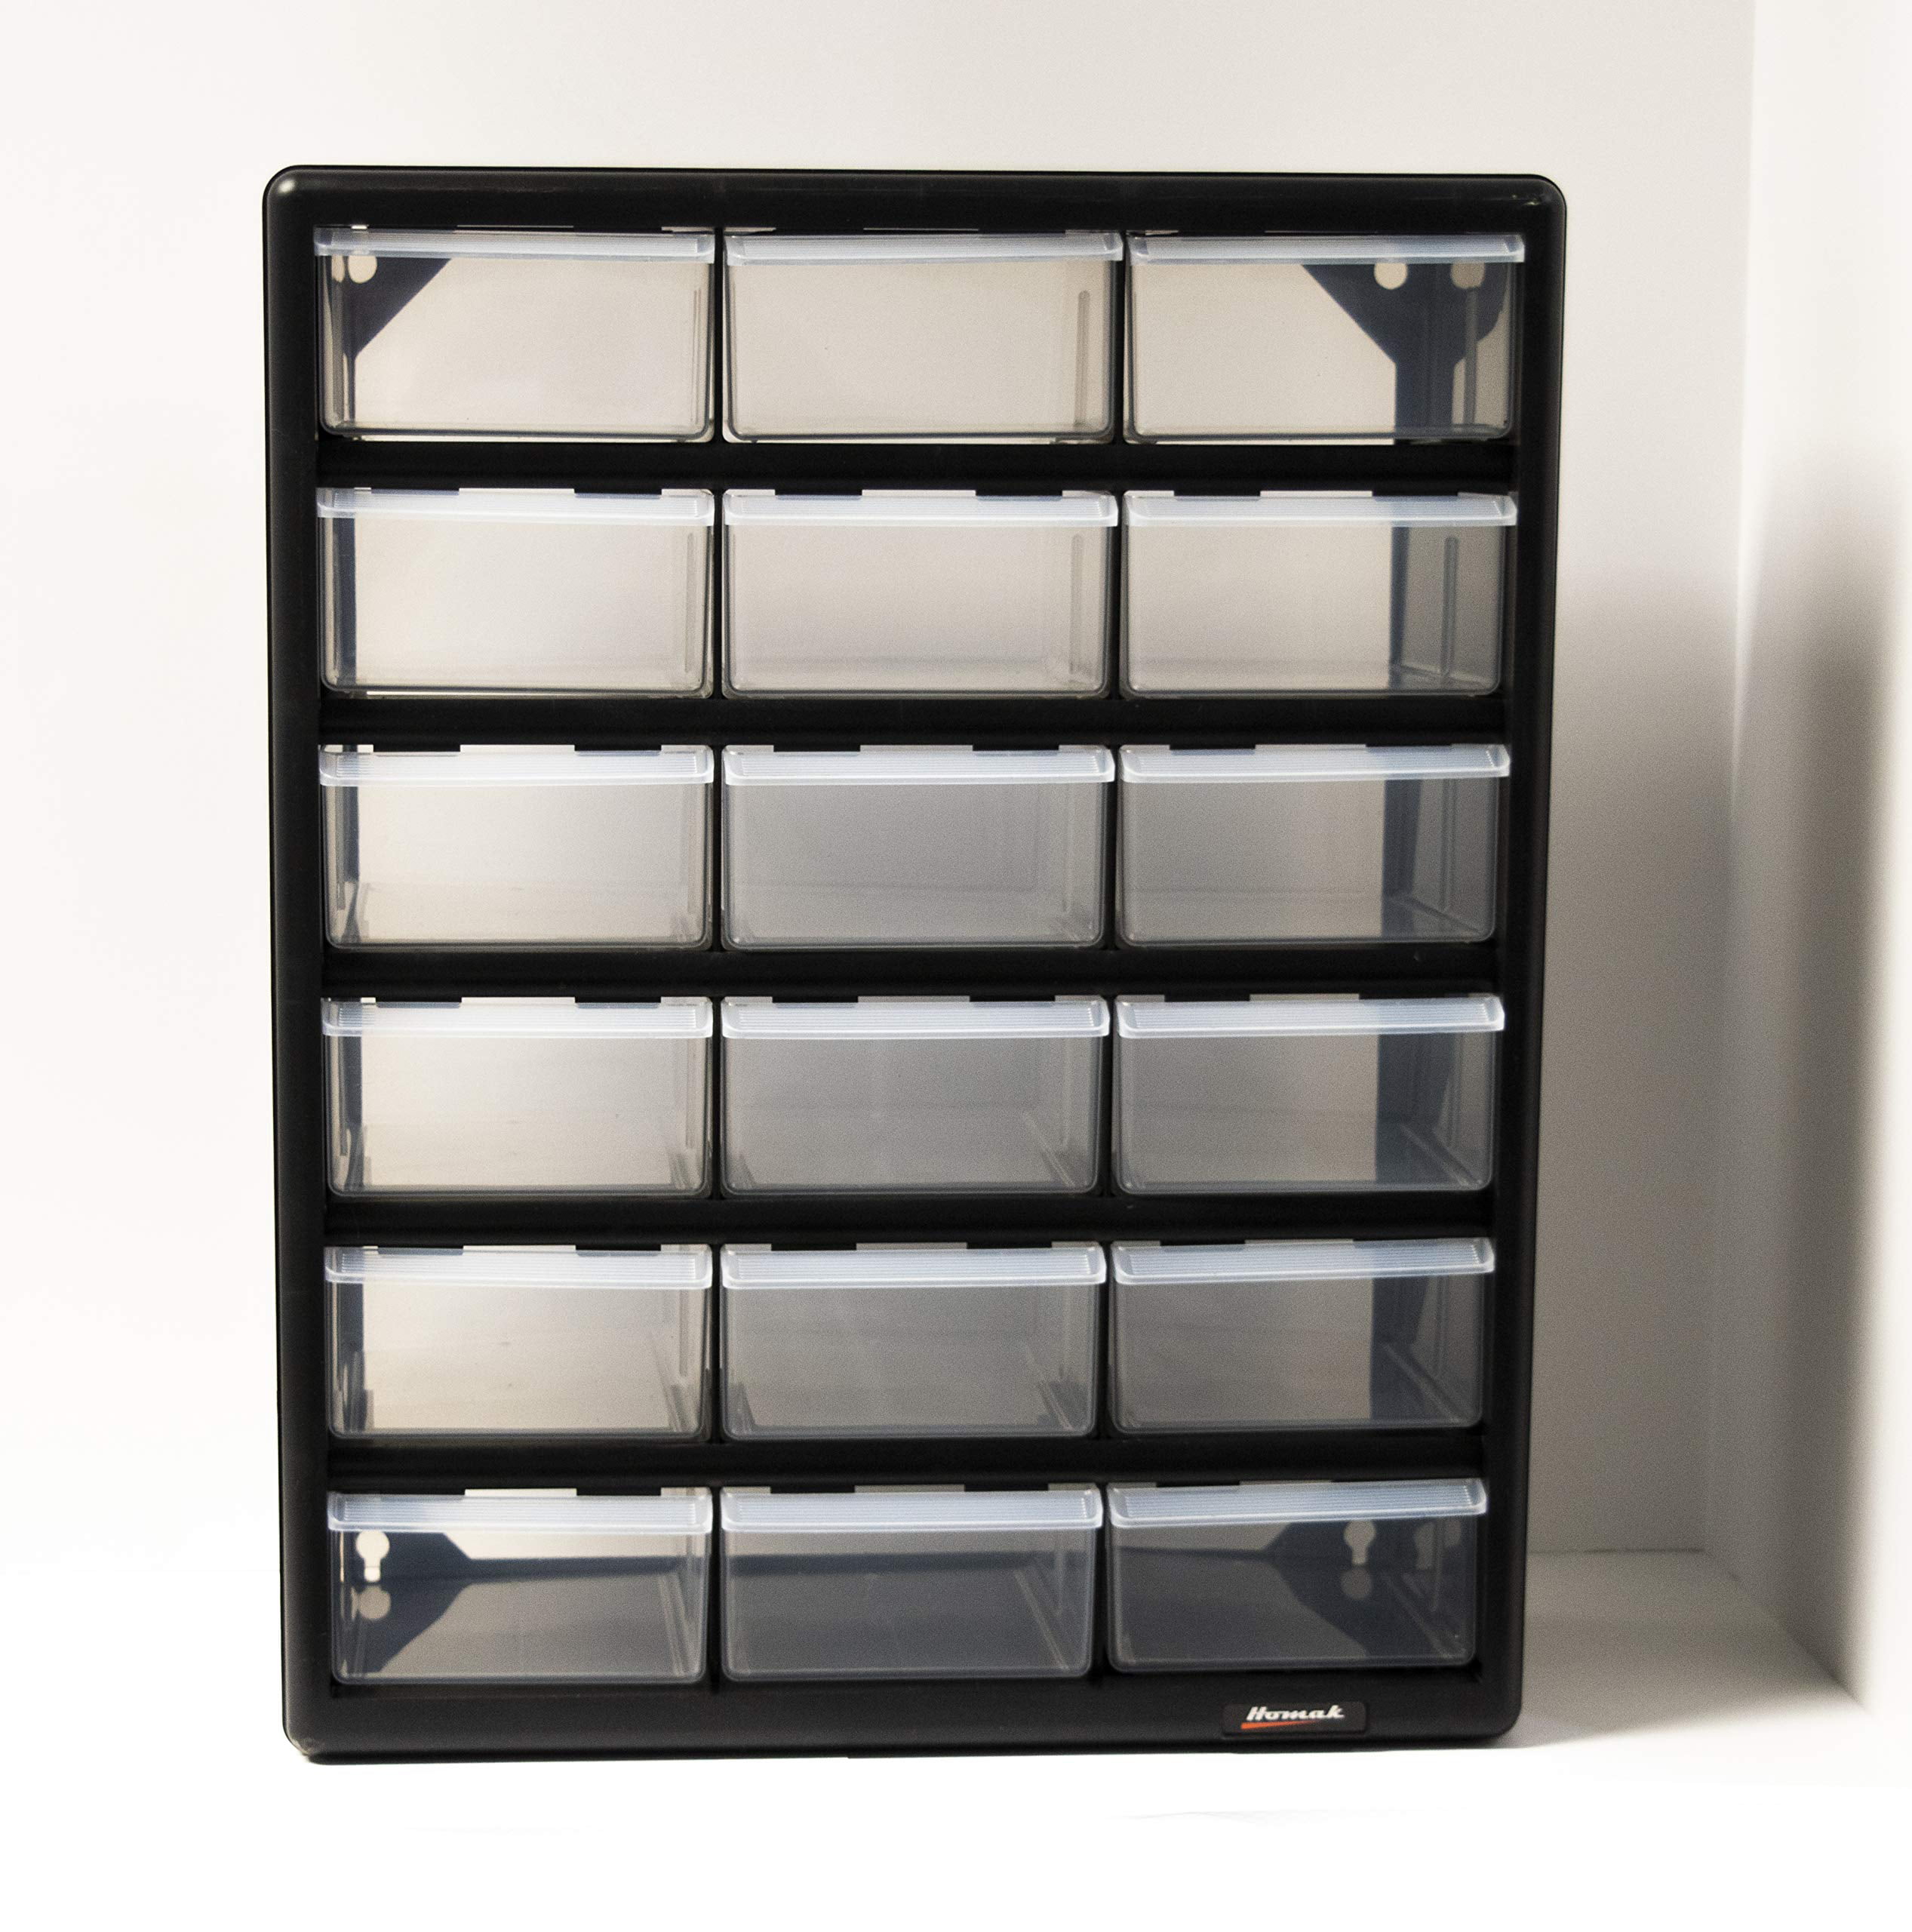 Massca Hardware Organizer box with dividers - 18 Compartments